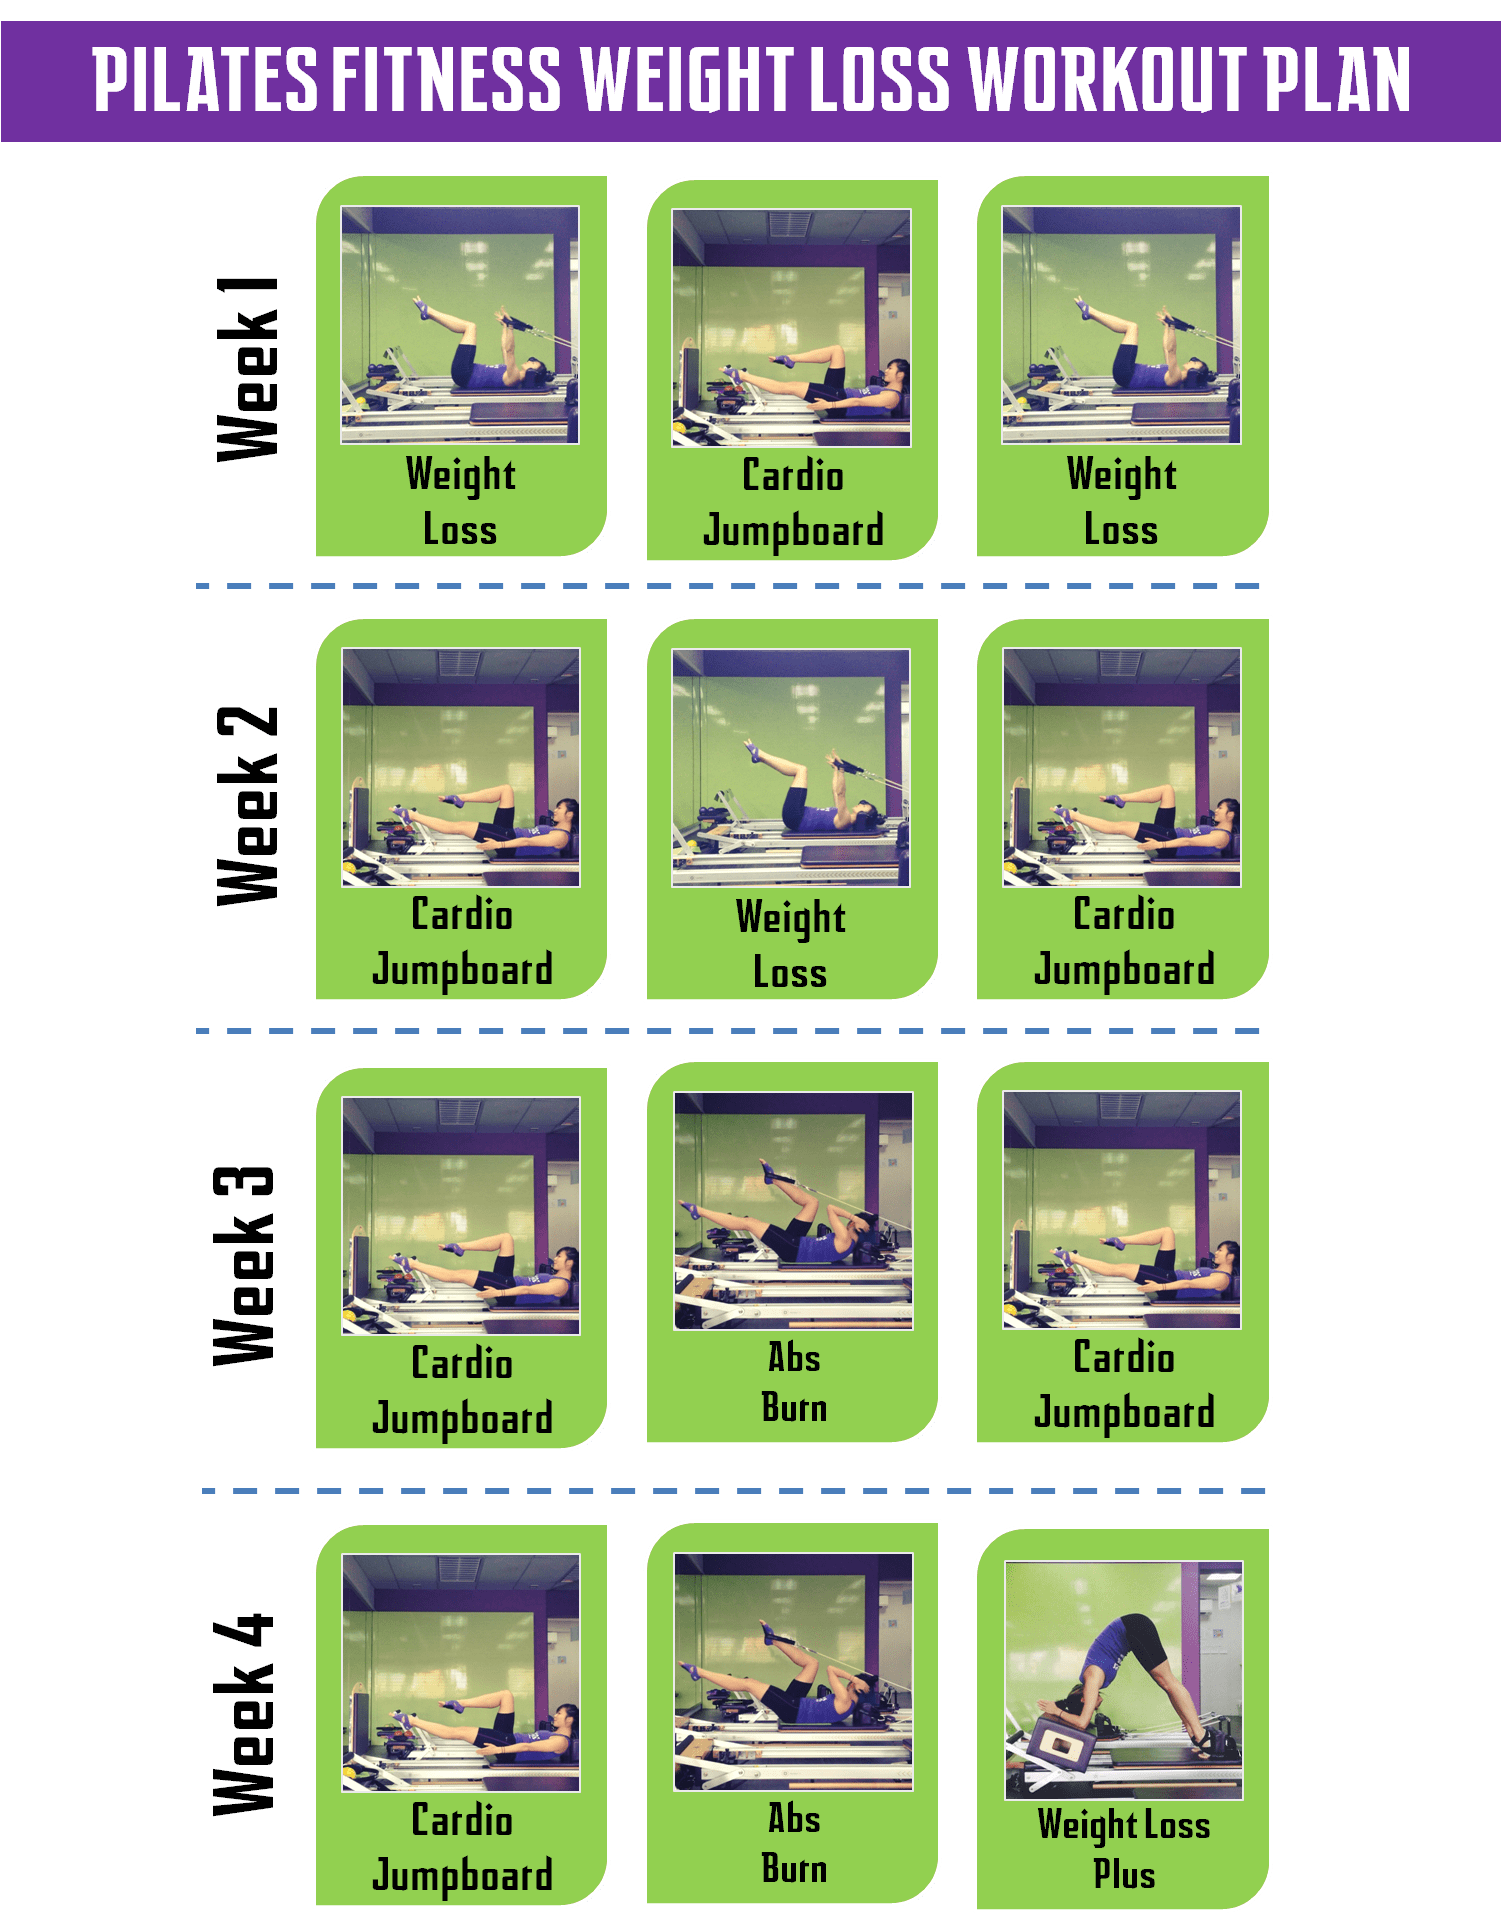 Intensive Workout Plans Win 28 Days Pilates Challenge Pilates Fitness